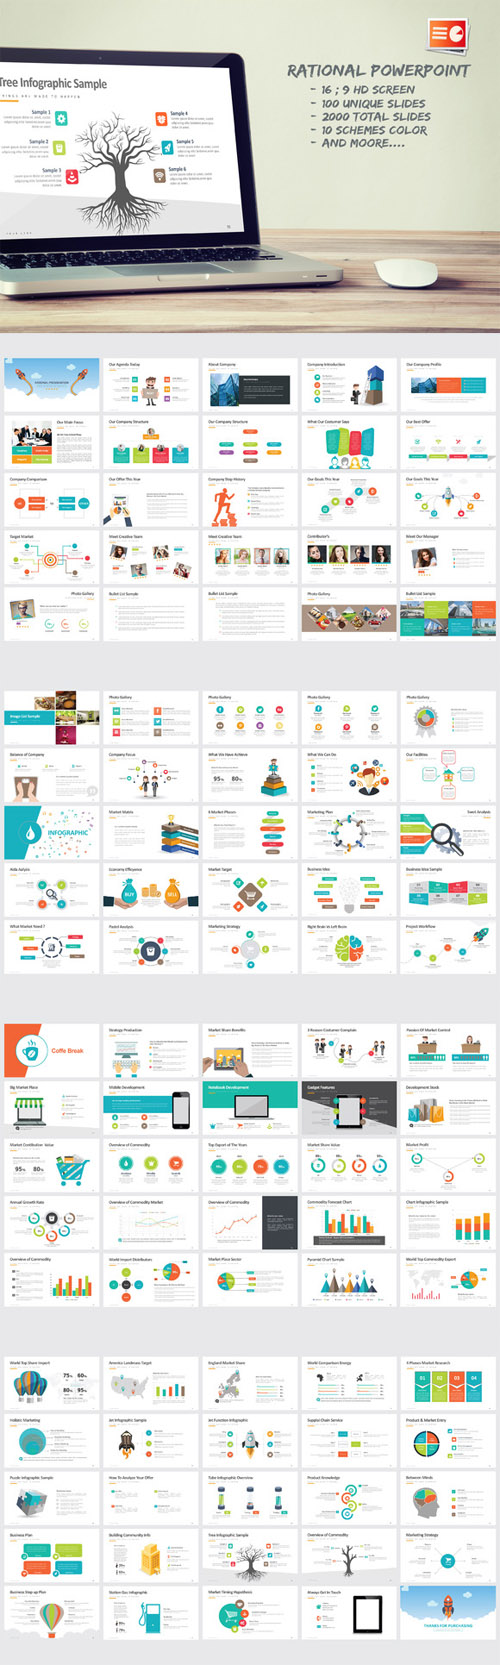 CM - Rational Powerpoint Template-358663